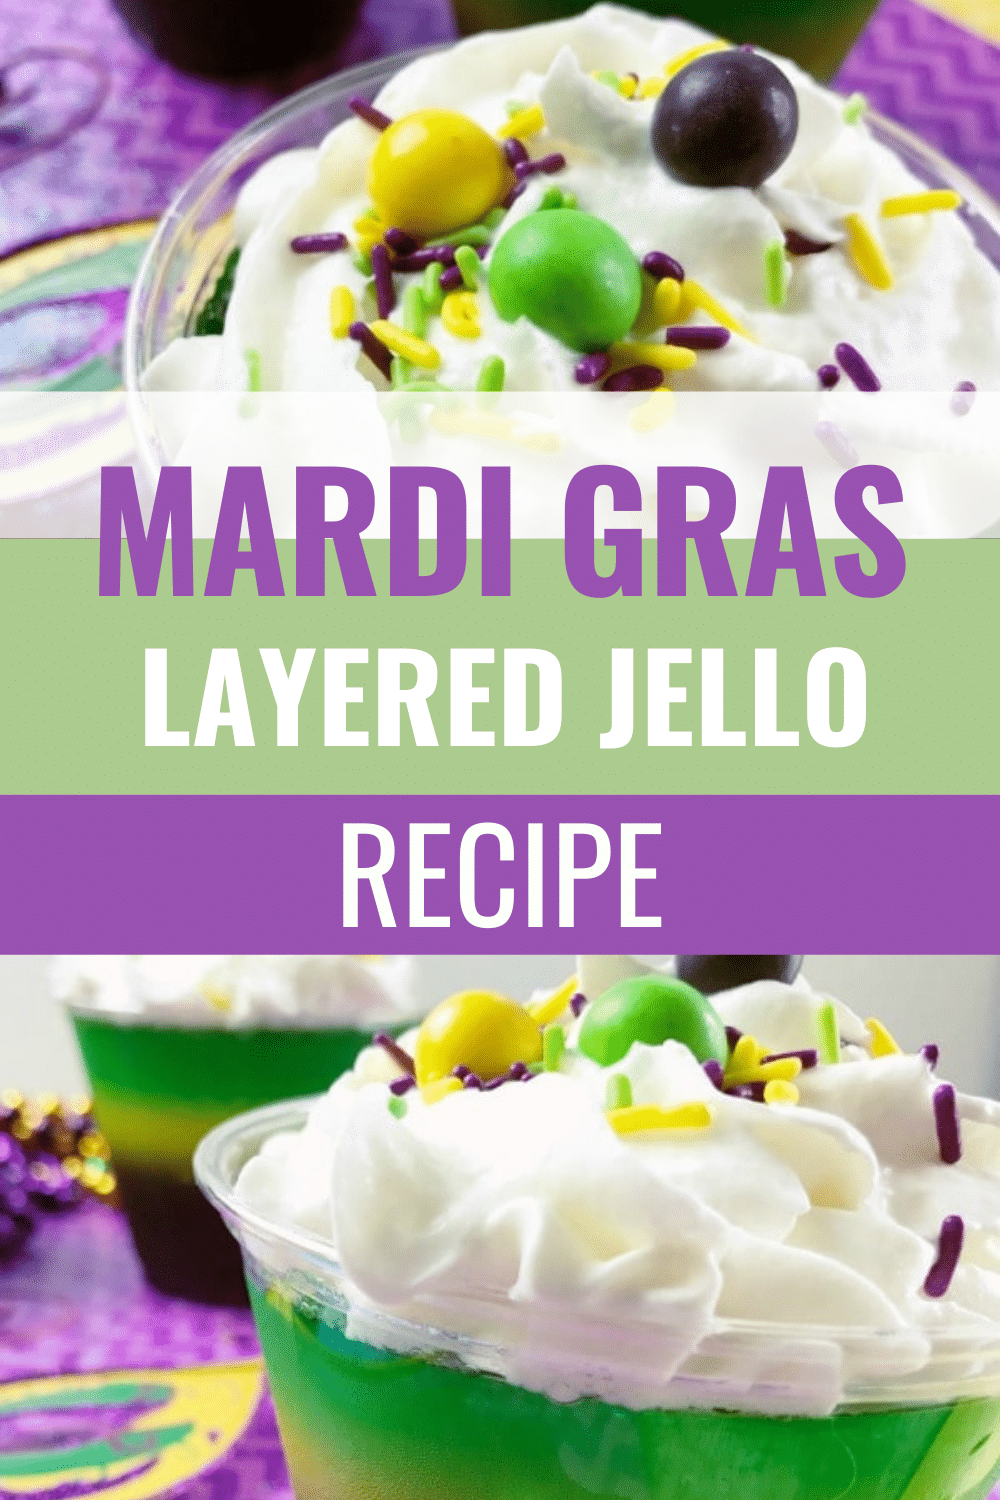 Mardi Gras Layered Jello Cups are the perfect colorful dessert to celebrate Fat Tuesday. A family friendly treat these Jello cups are simple to make ahead. #mardigras #fattuesday #jello via @wondermomwannab